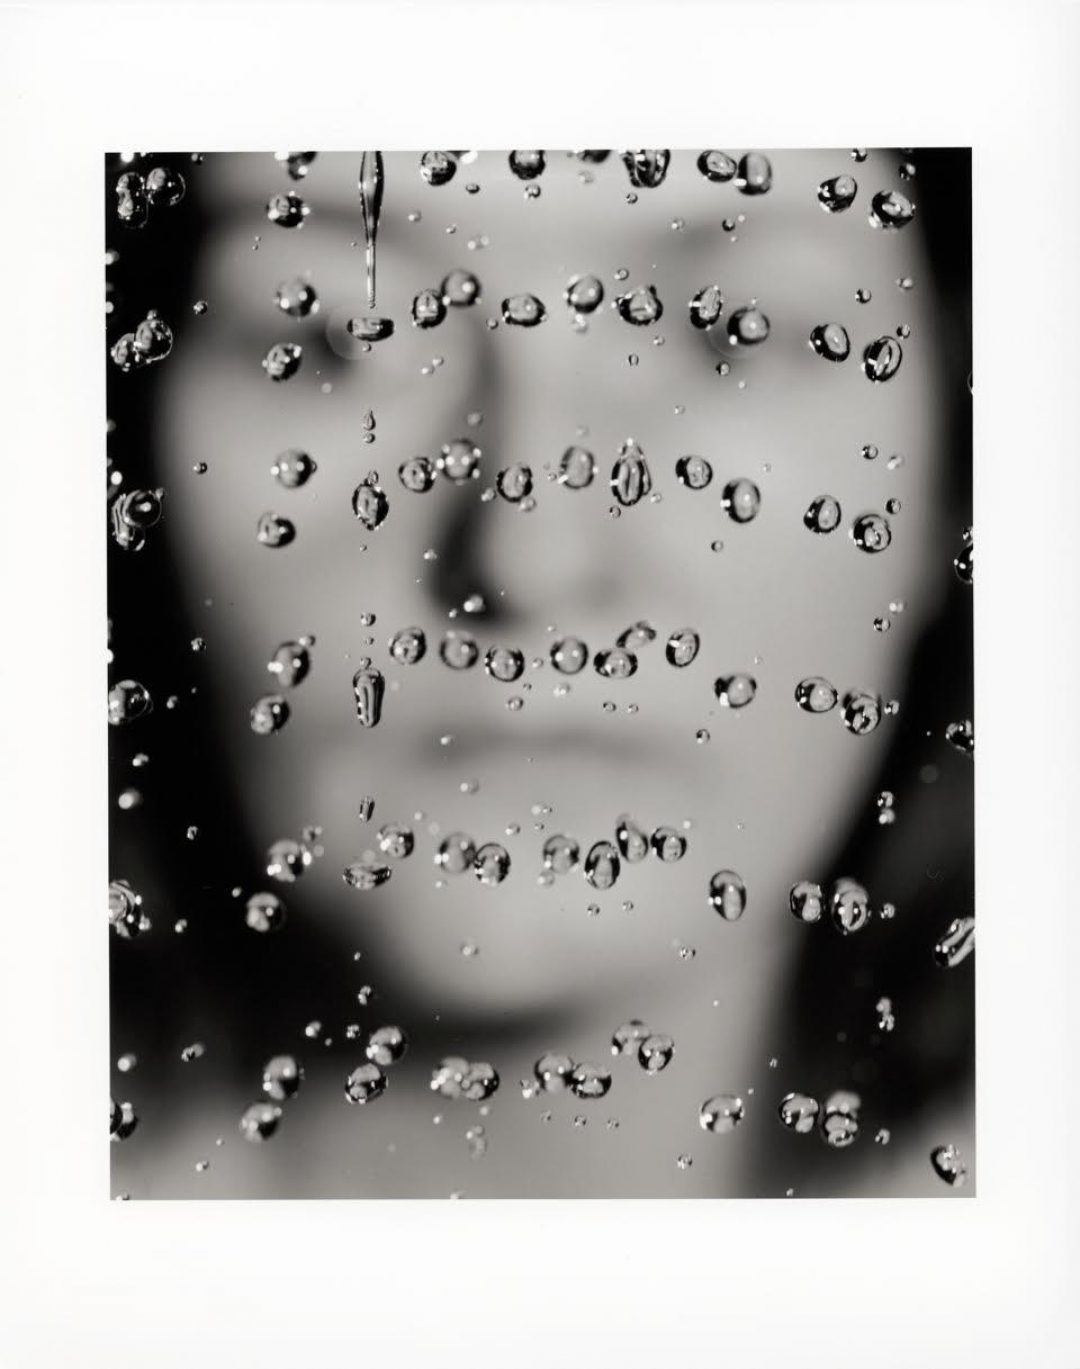 Image: Susan Derges, The Observer and the Observed, 1992, Gelatin silver print © the artist